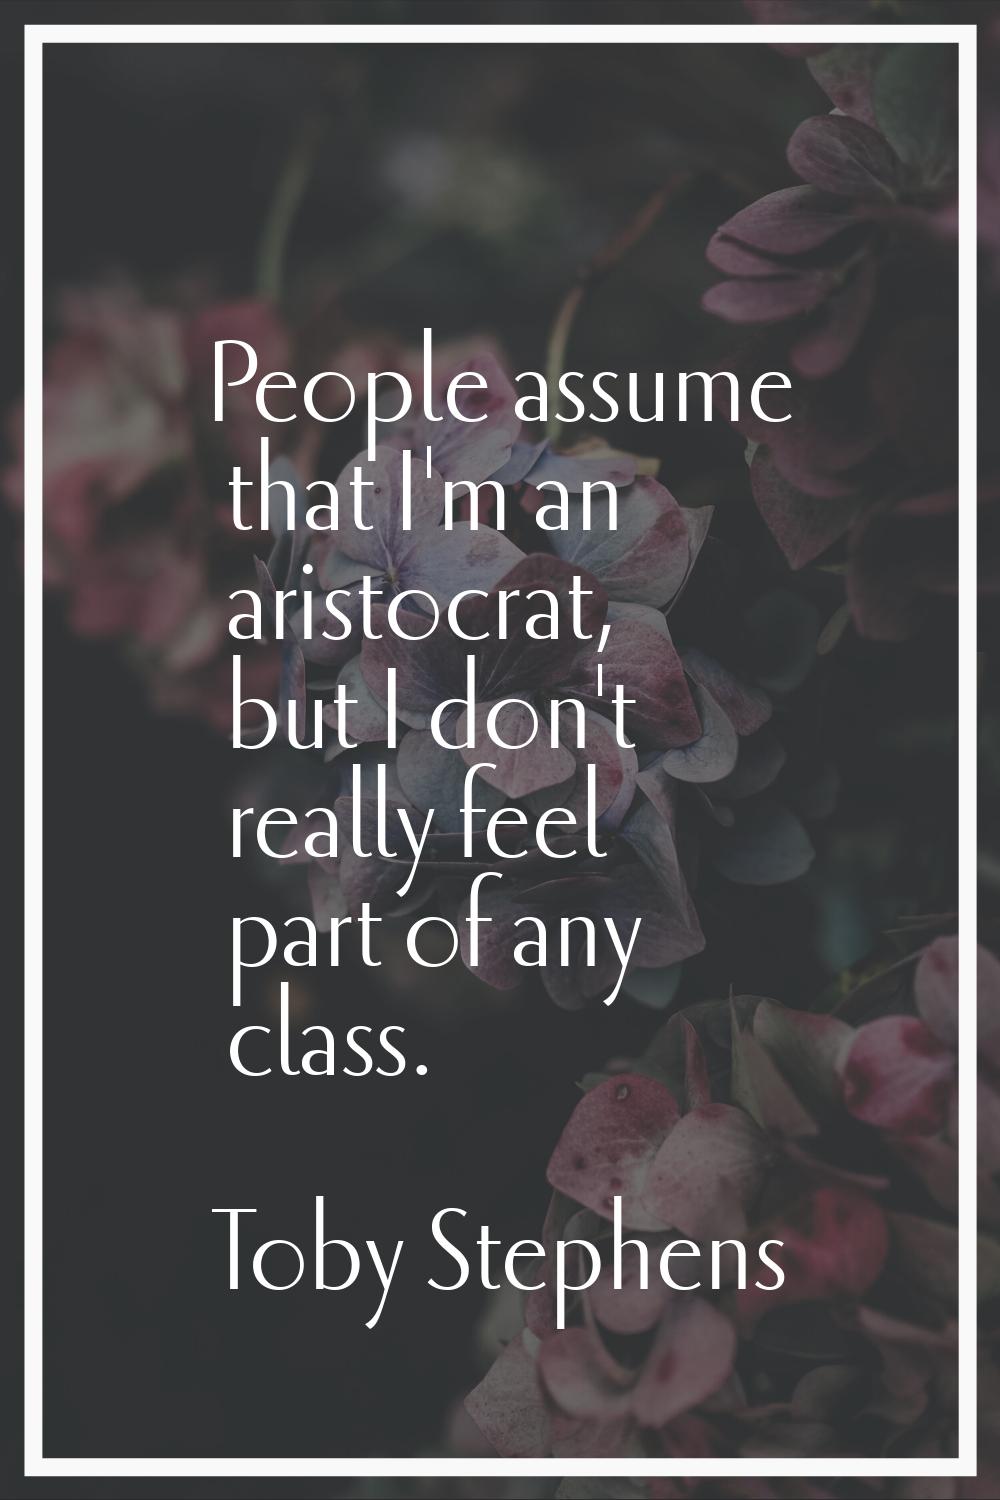 People assume that I'm an aristocrat, but I don't really feel part of any class.